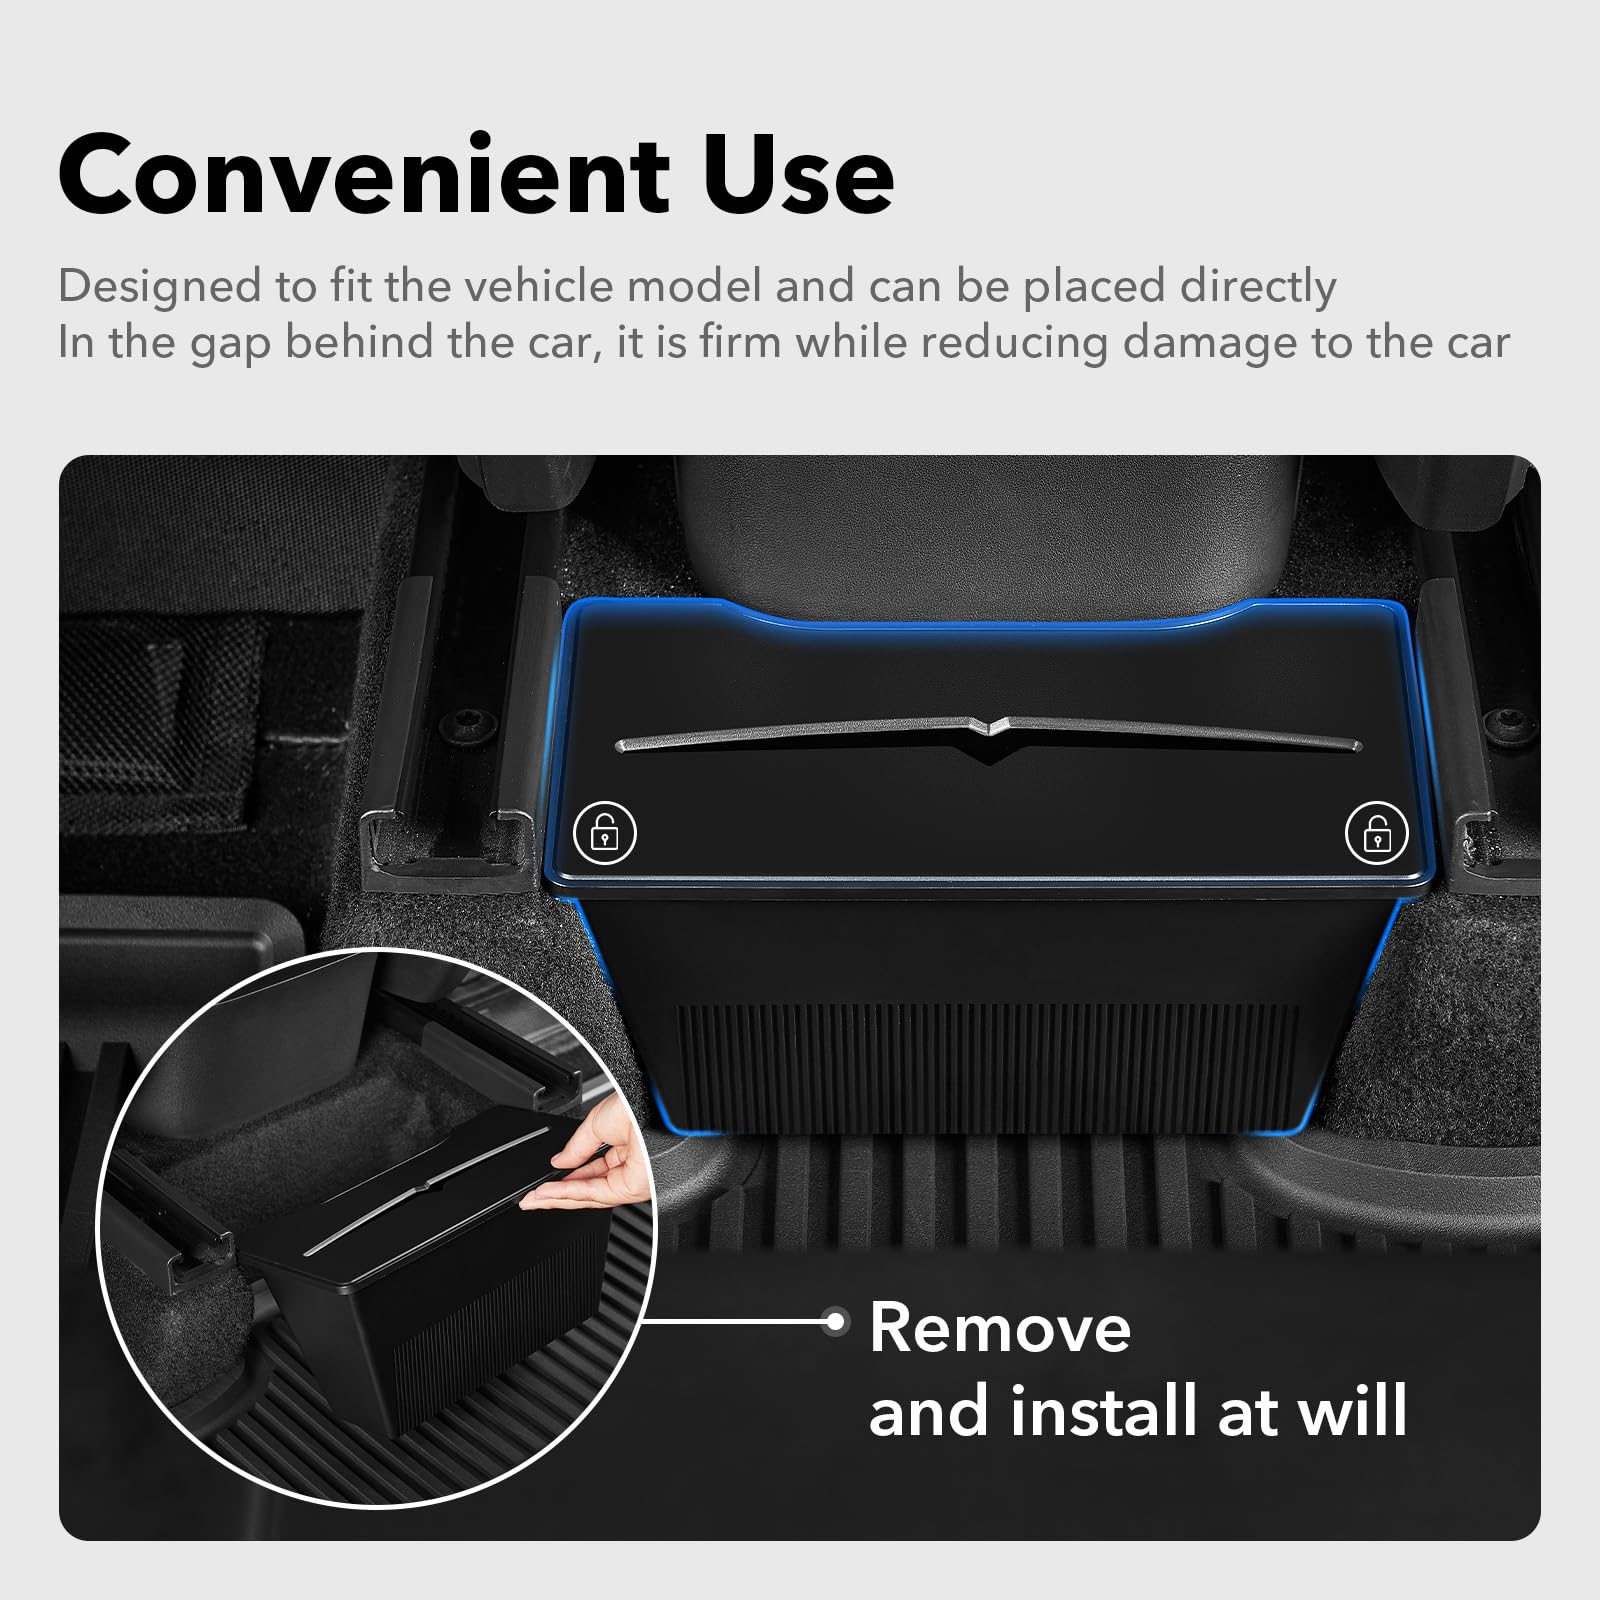 3W 2020-2022 Tesla Model Y Accessories-2Pcs Under Seat Storage Box 2Pcs Rear Trunk Organizer Side Storage Box with Lids Rear Center Console Storage Bin TPE Waterproof Odorless Protector Packets Vehicles & Parts 3Wliners   